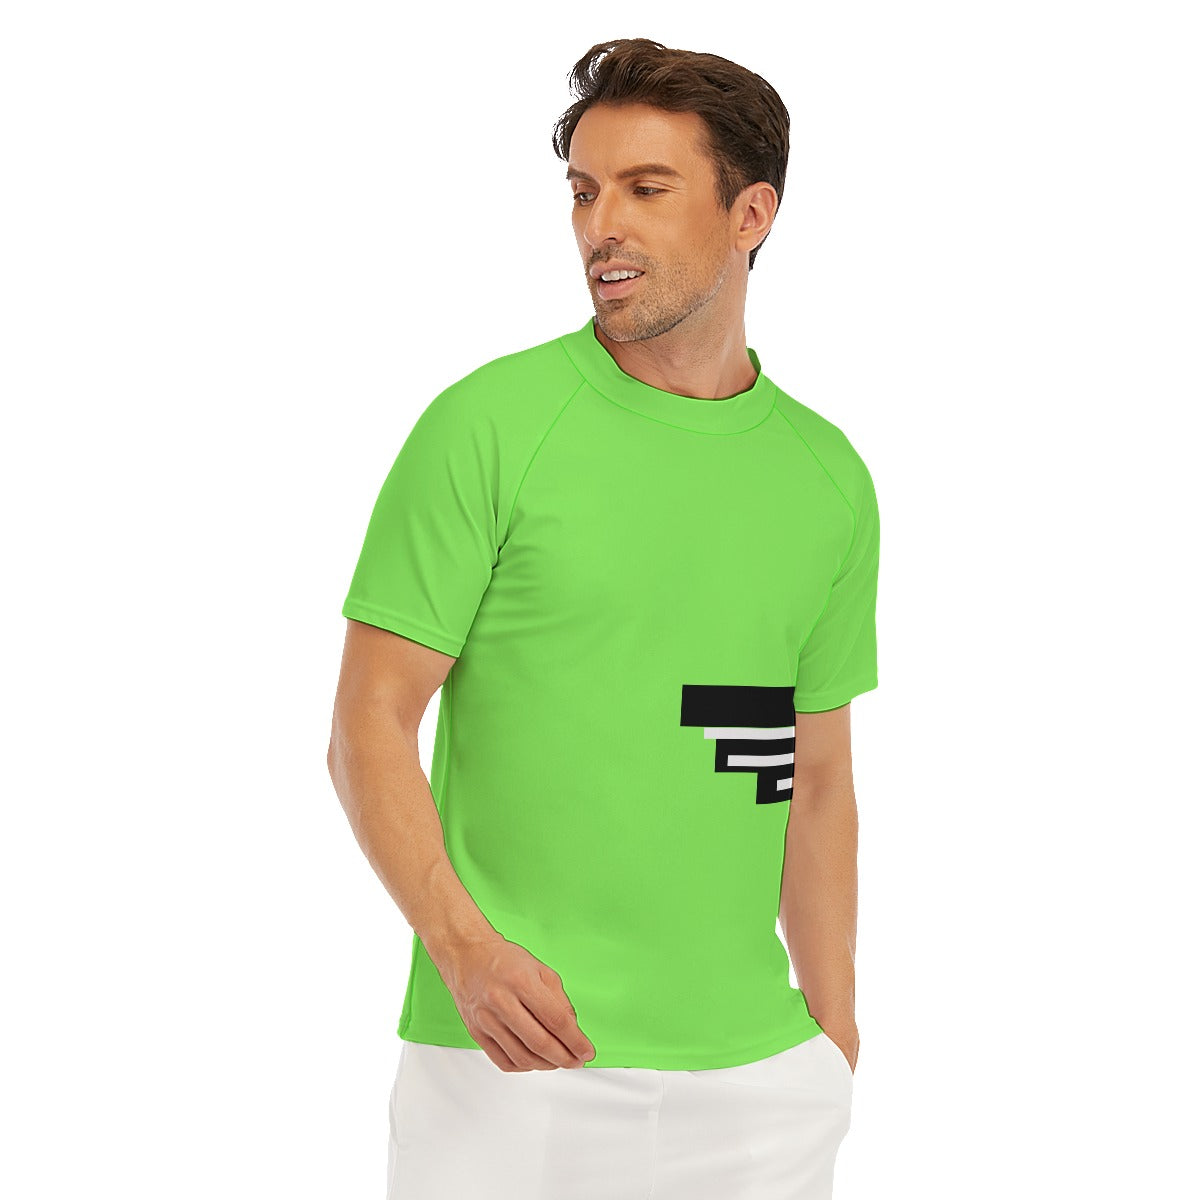 UNLIMITED - Men's Pickleball Fitted T-Shirt by Dizzy Pickle